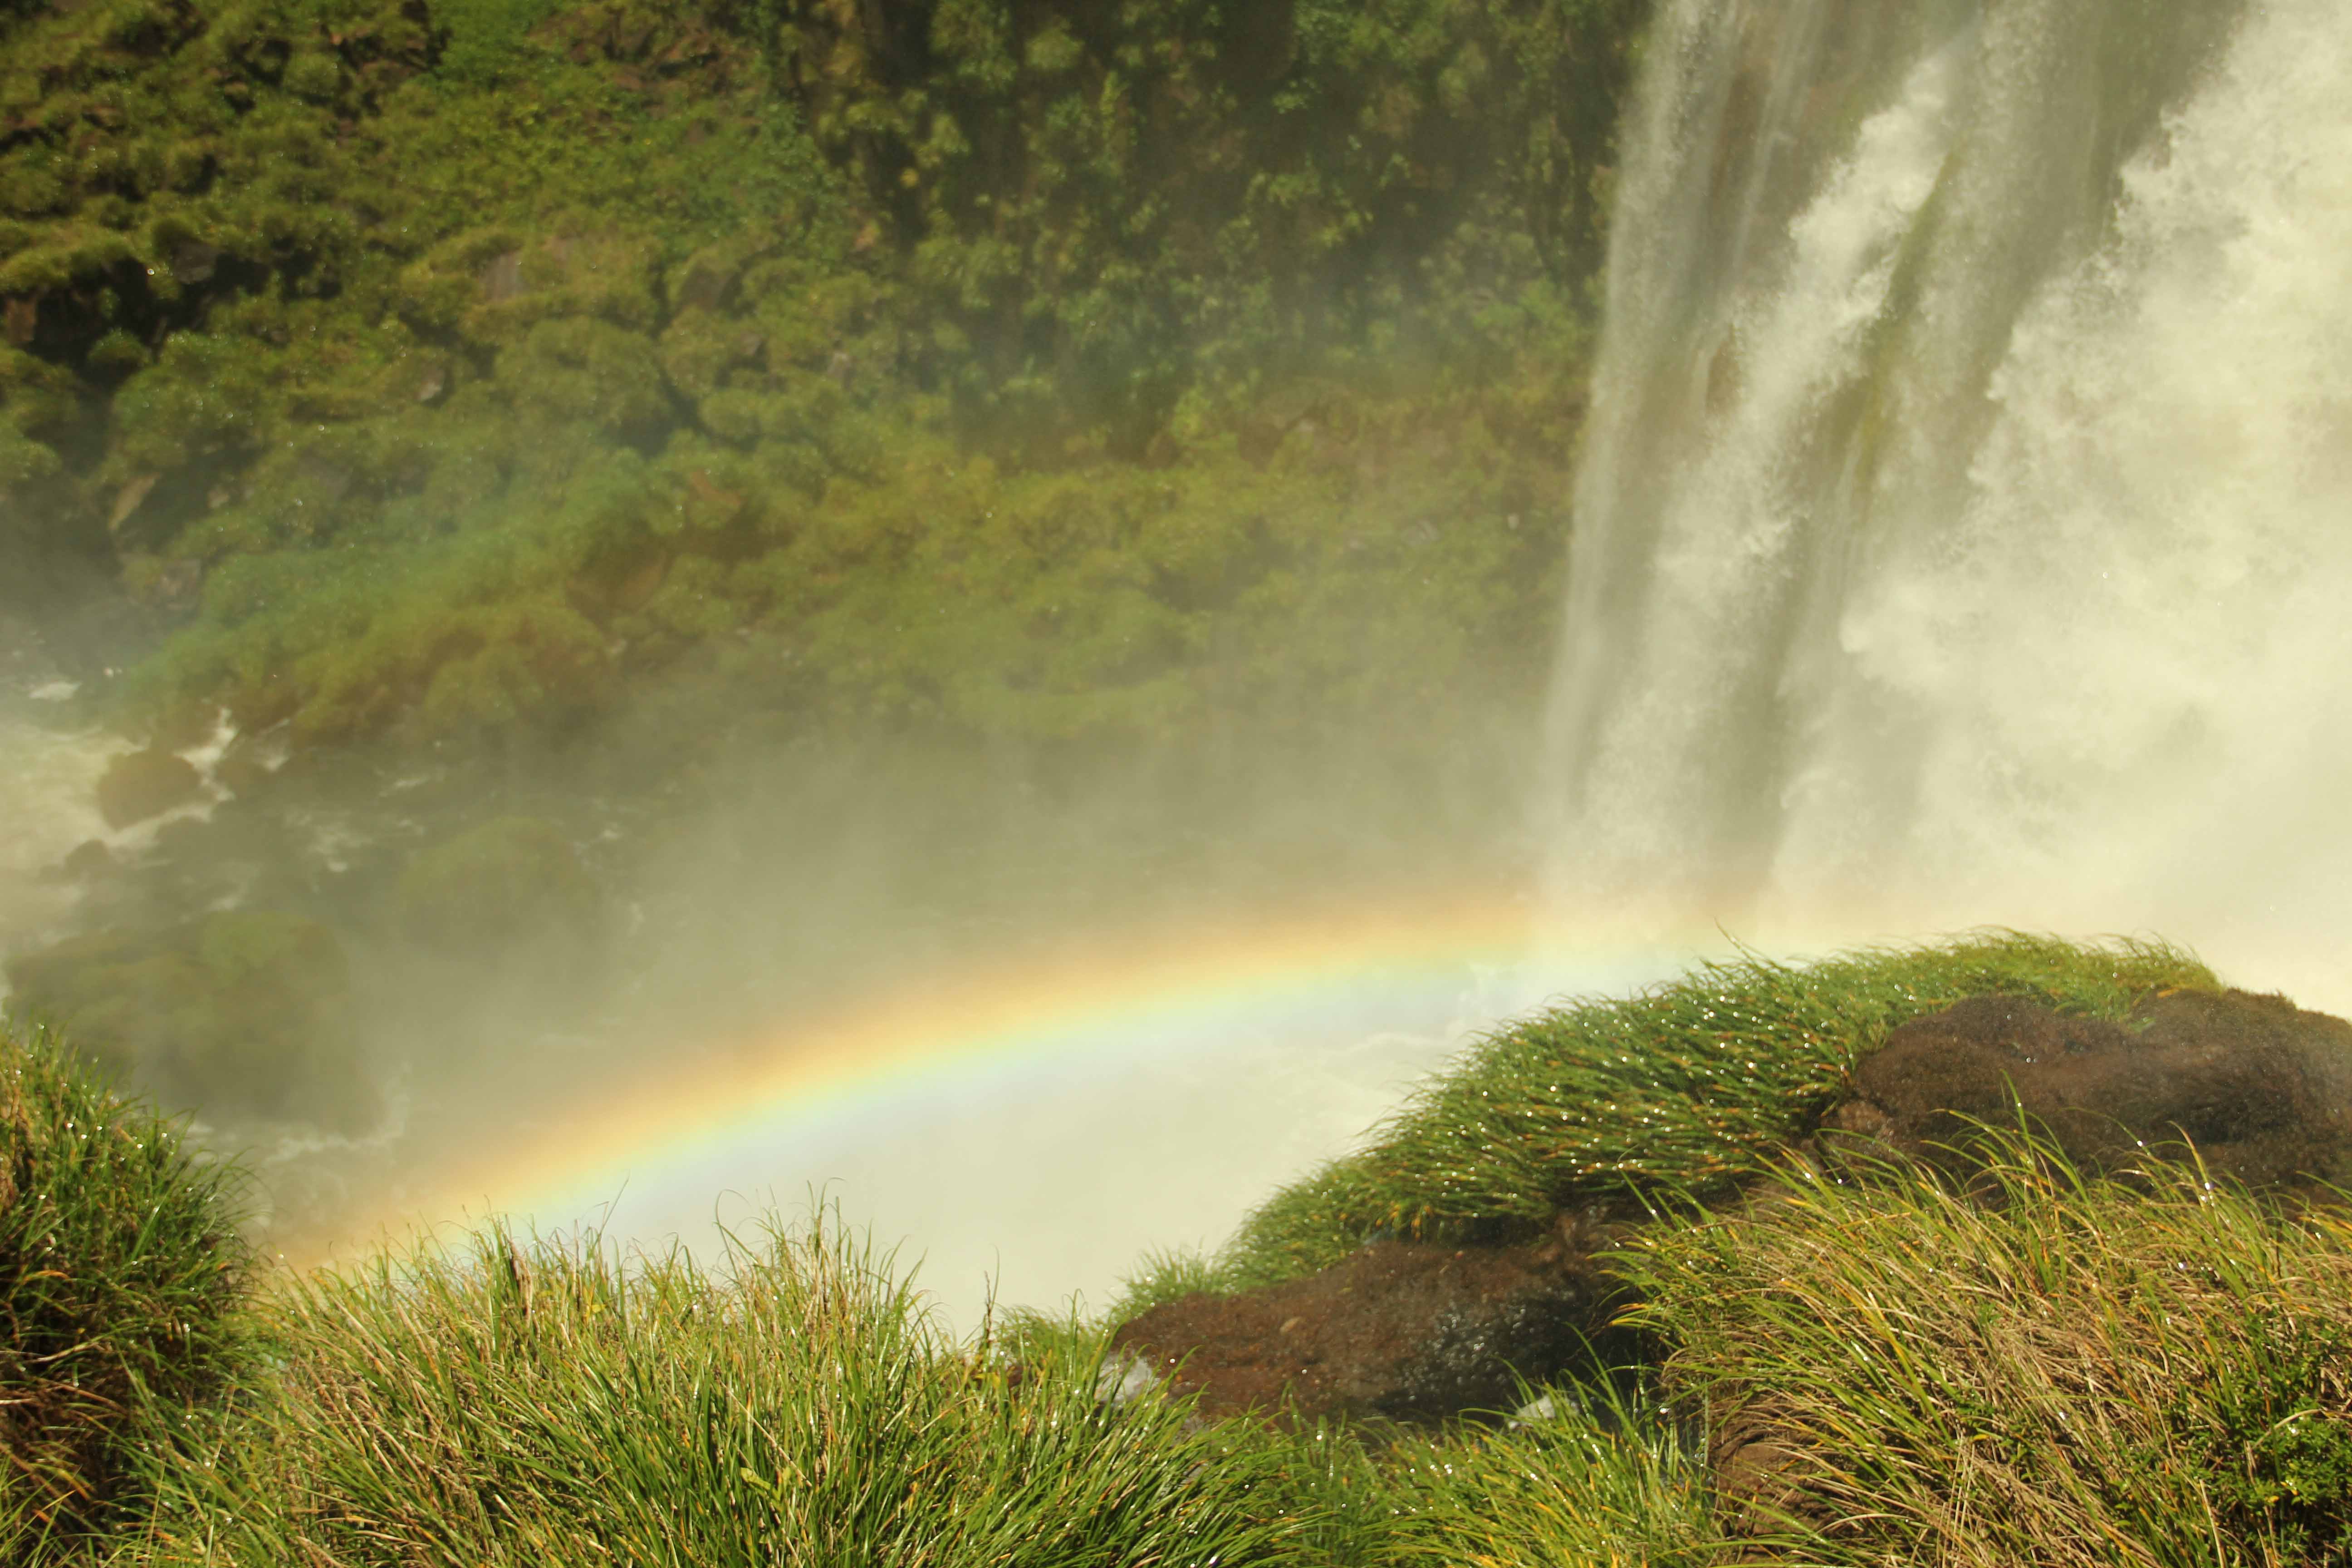 Lots of rainbows appear in the falls